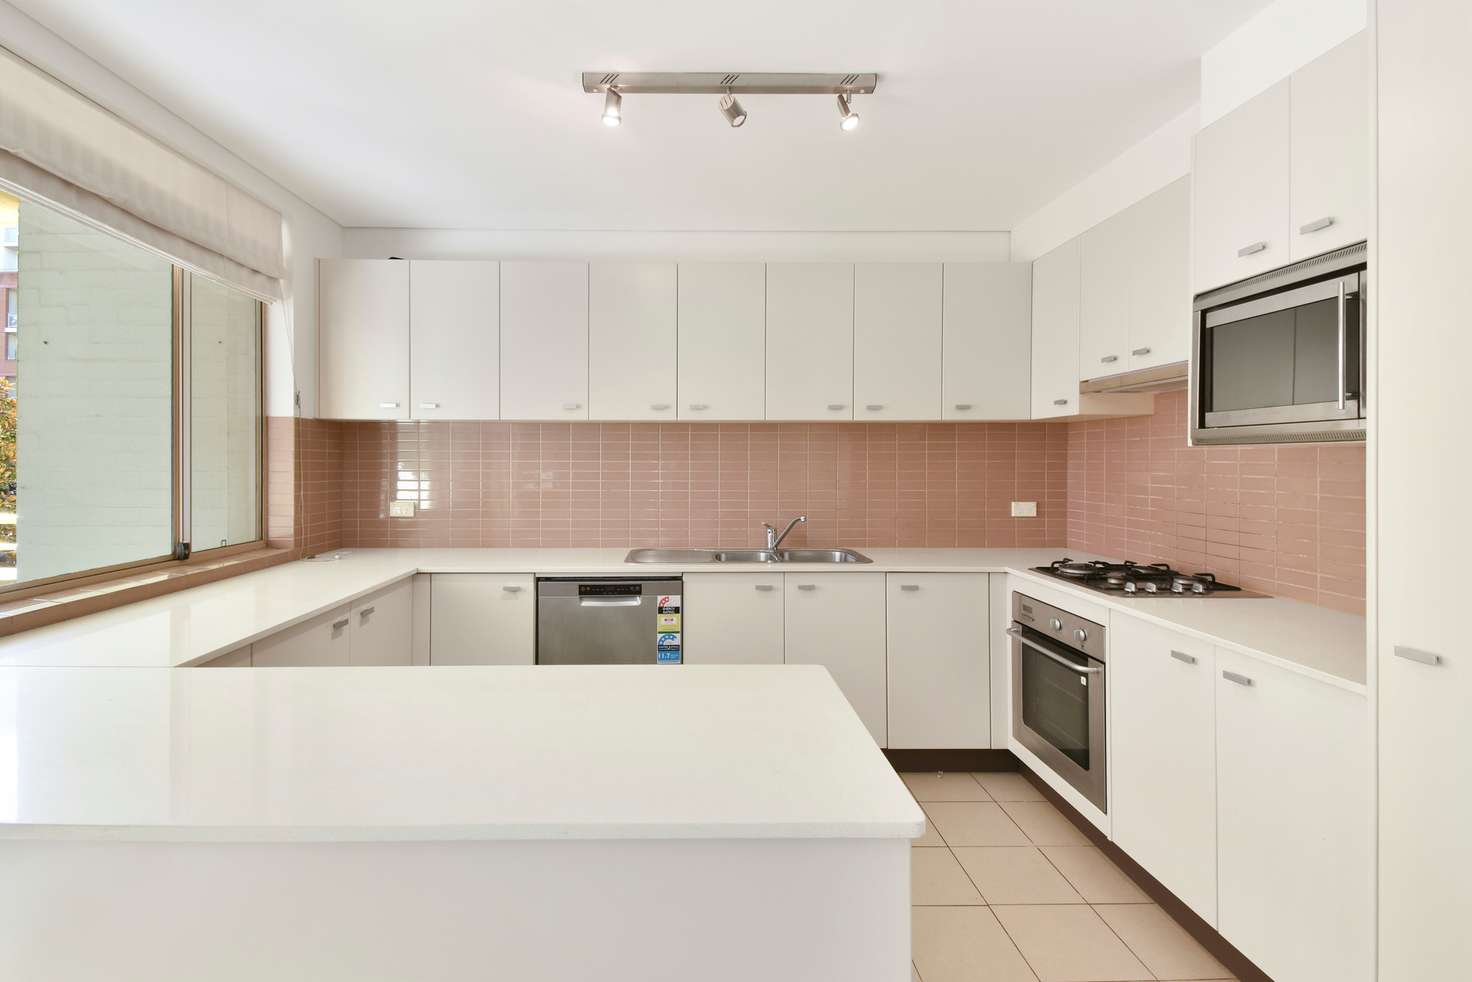 Main view of Homely apartment listing, 204/4 Stromboli Strait, Wentworth Point NSW 2127